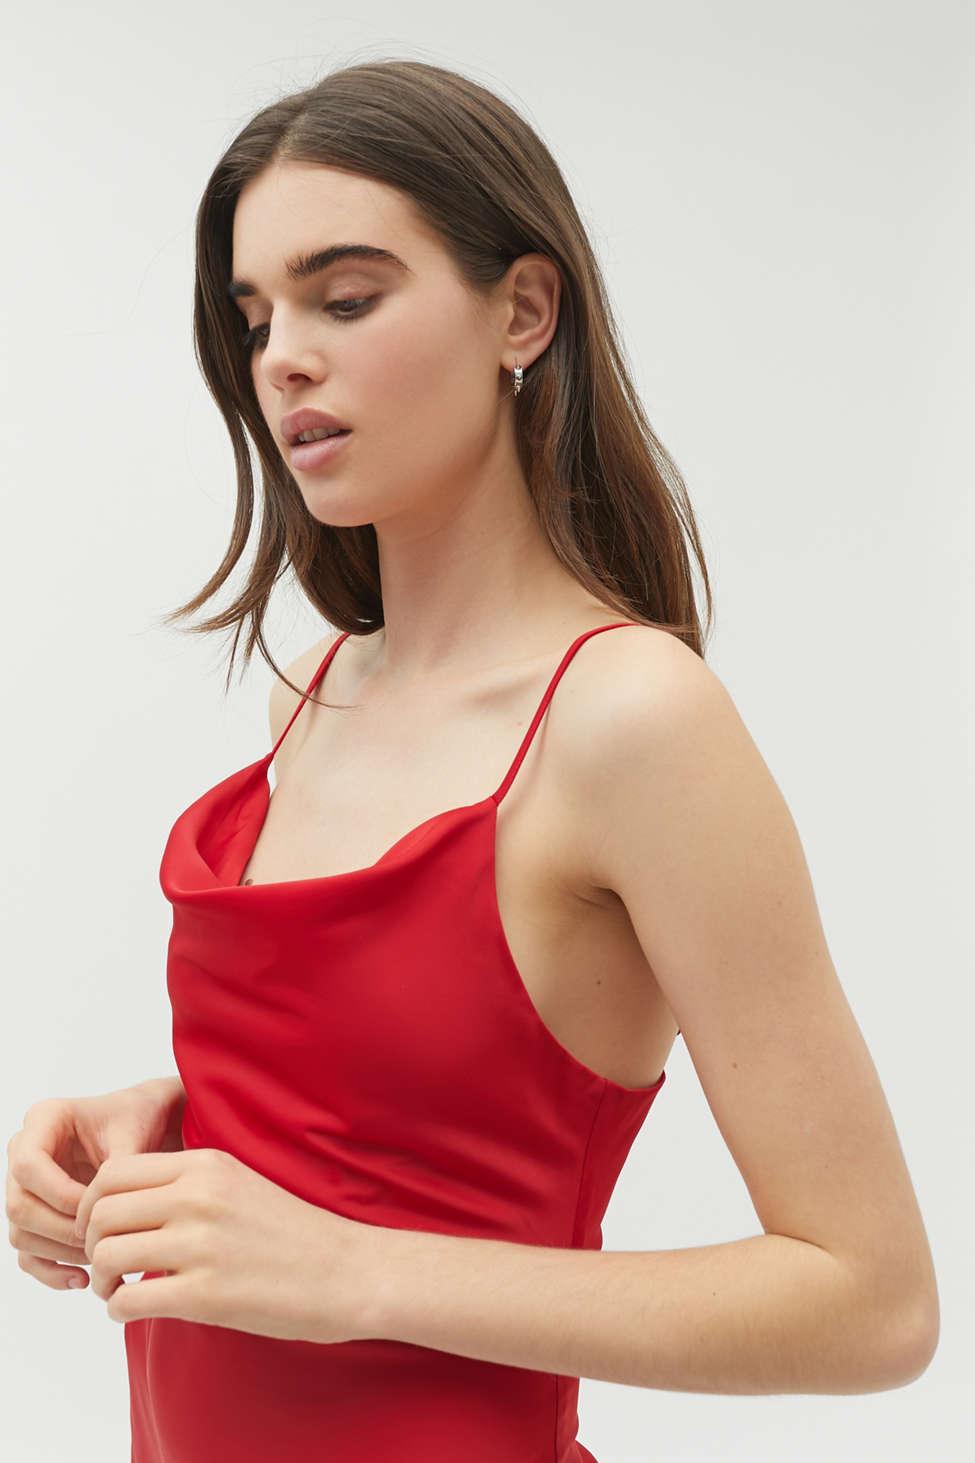 Urban Outfitters Satin Uo Mallory Cowl Neck Slip Dress in Red - Lyst